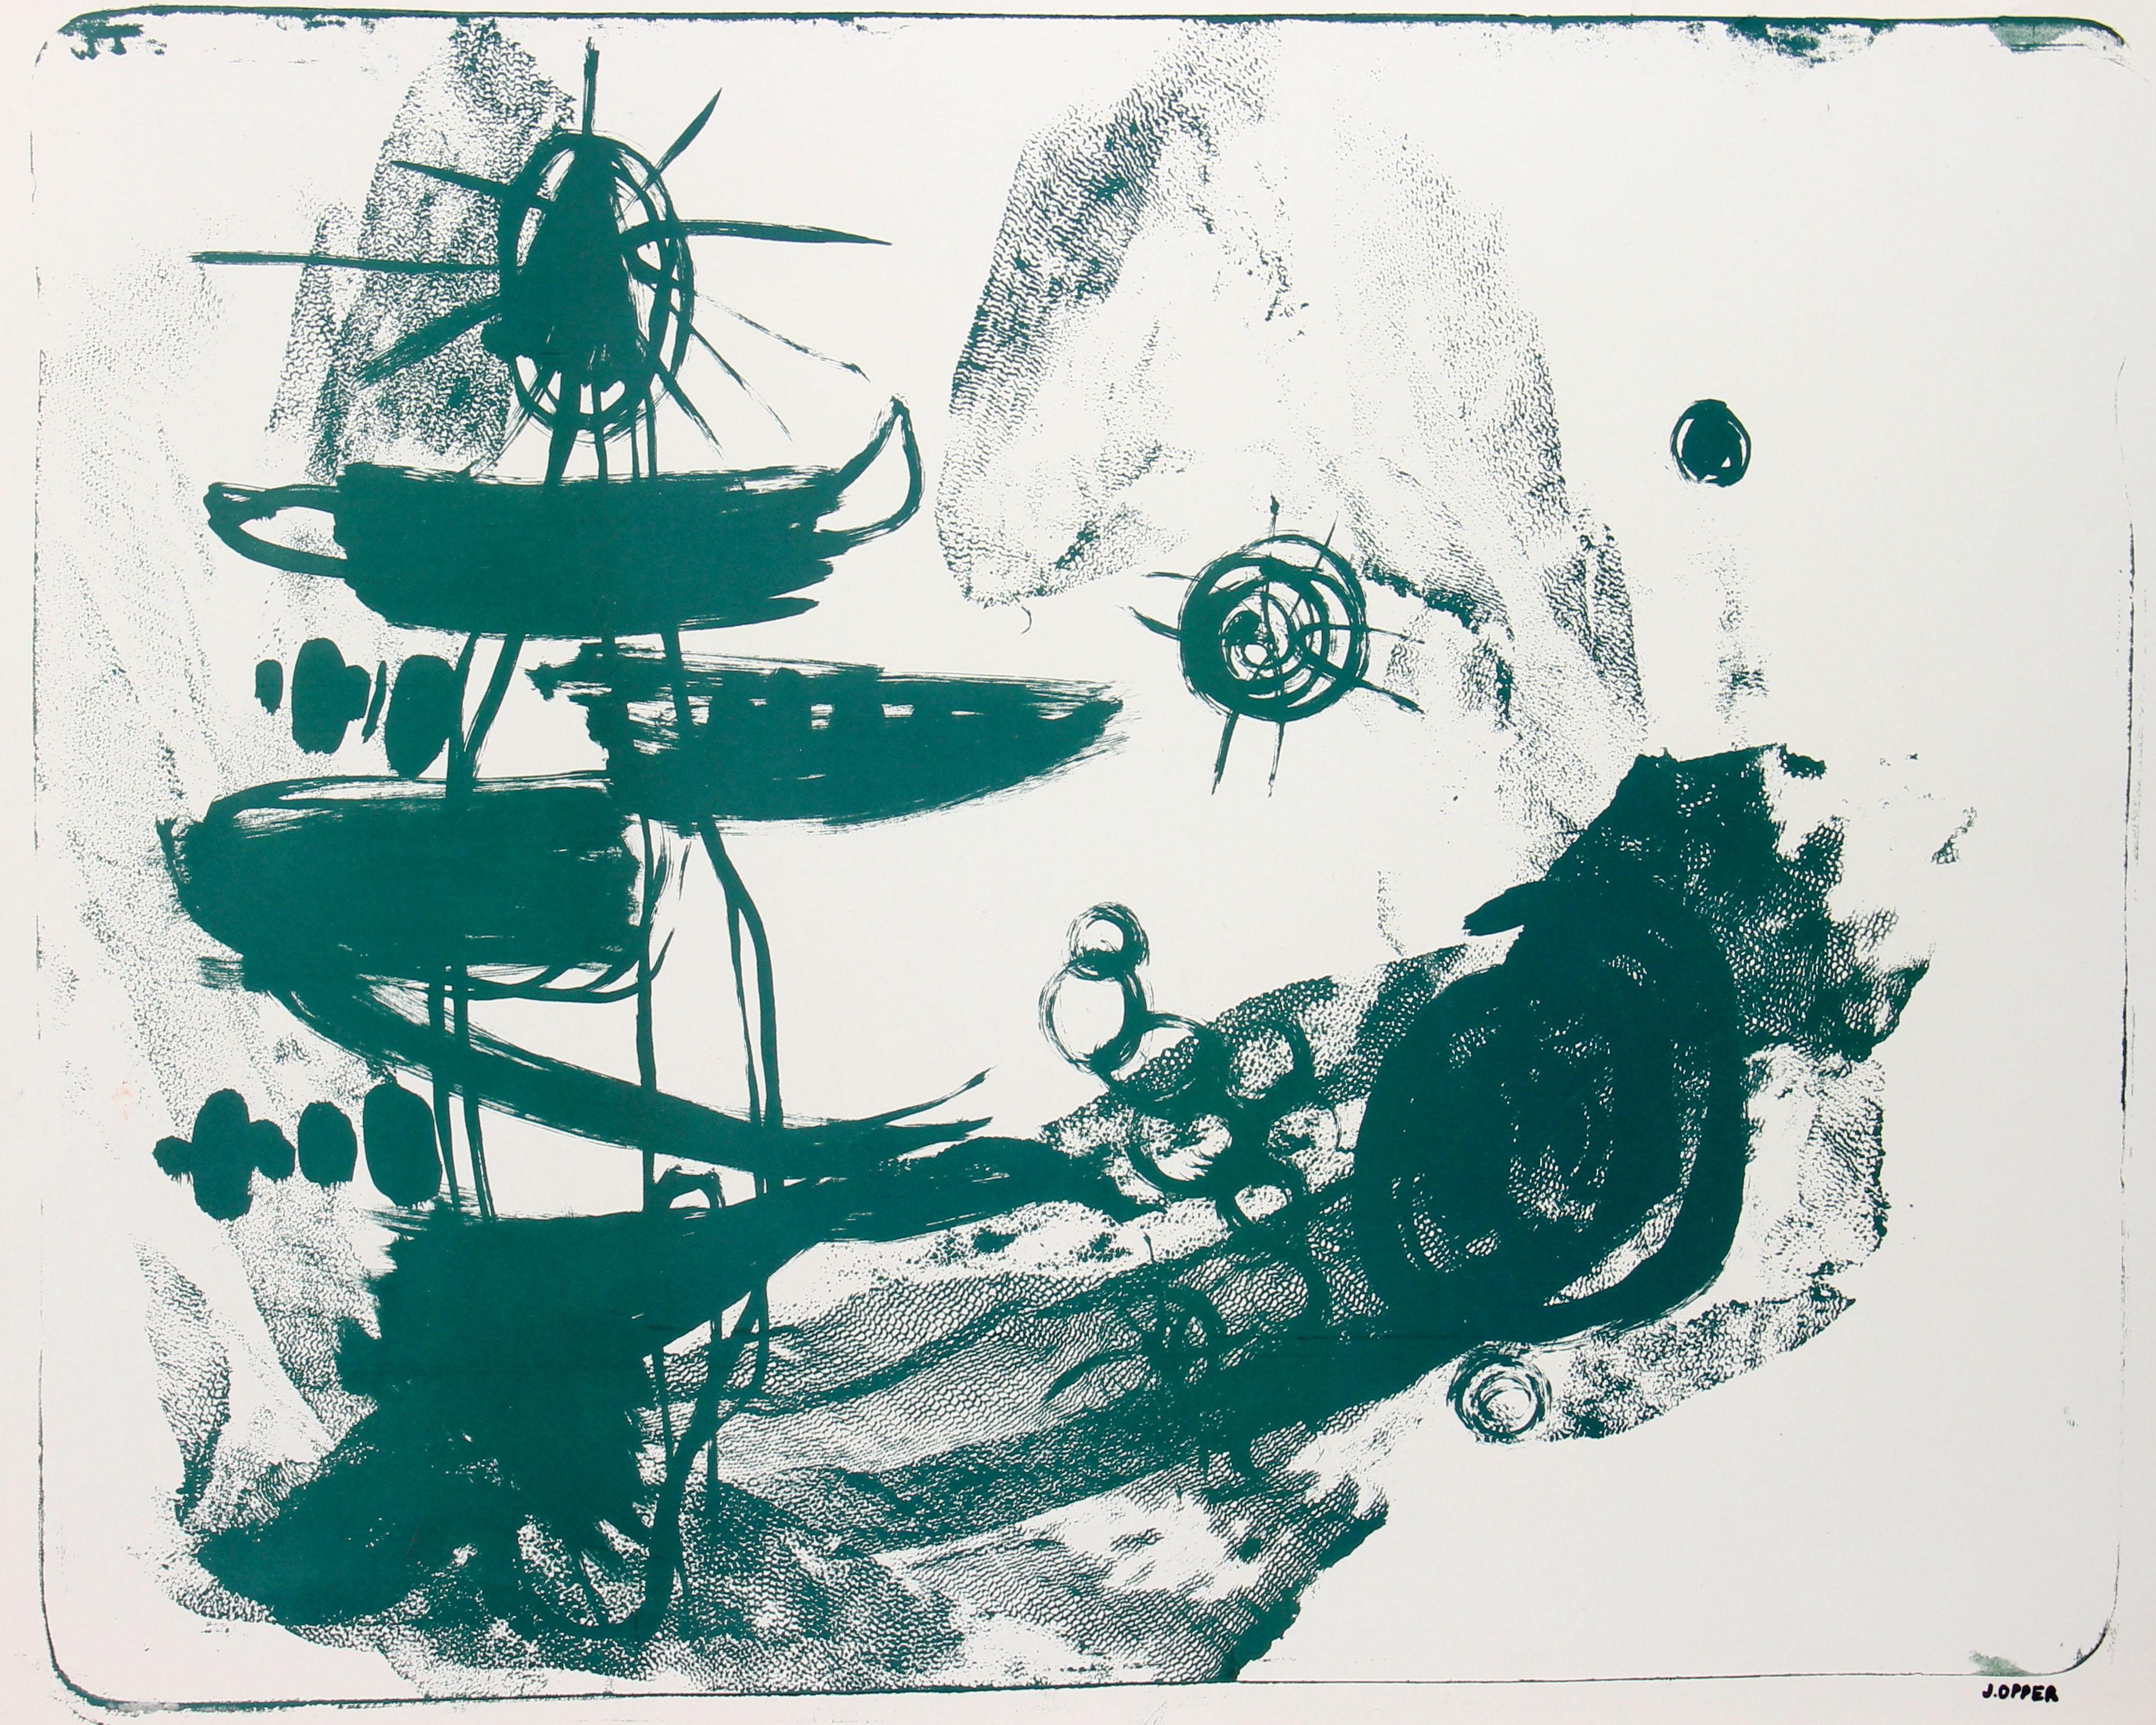 This 1950 abstract Modern stone lithograph on paper in green is by Californian artist Jerry Opper (b. 1924). After graduating from Hollywood High School, he worked in movie studios and attended art classes at Chouinard Art Institute in Los Angeles.